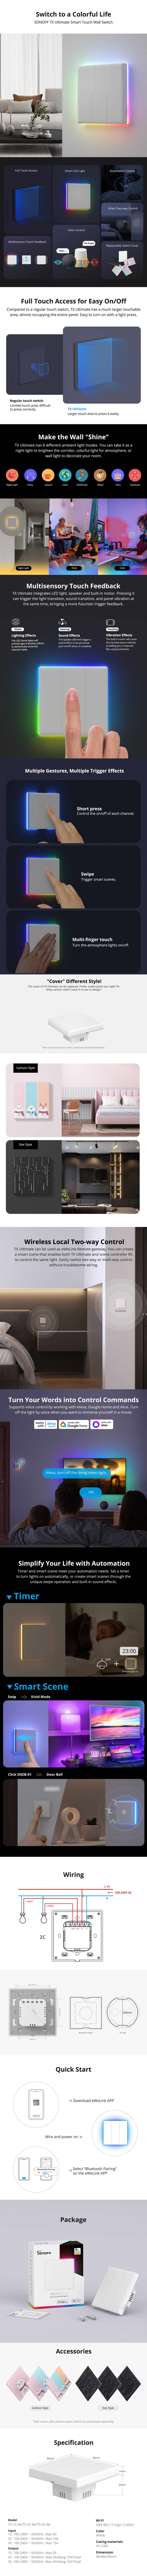 SONOFF T5 WiFi Smart Touch Wall Switch Replaceable Switch Cover Wireless APP/ Voice Remote Control via Alexa Google Home